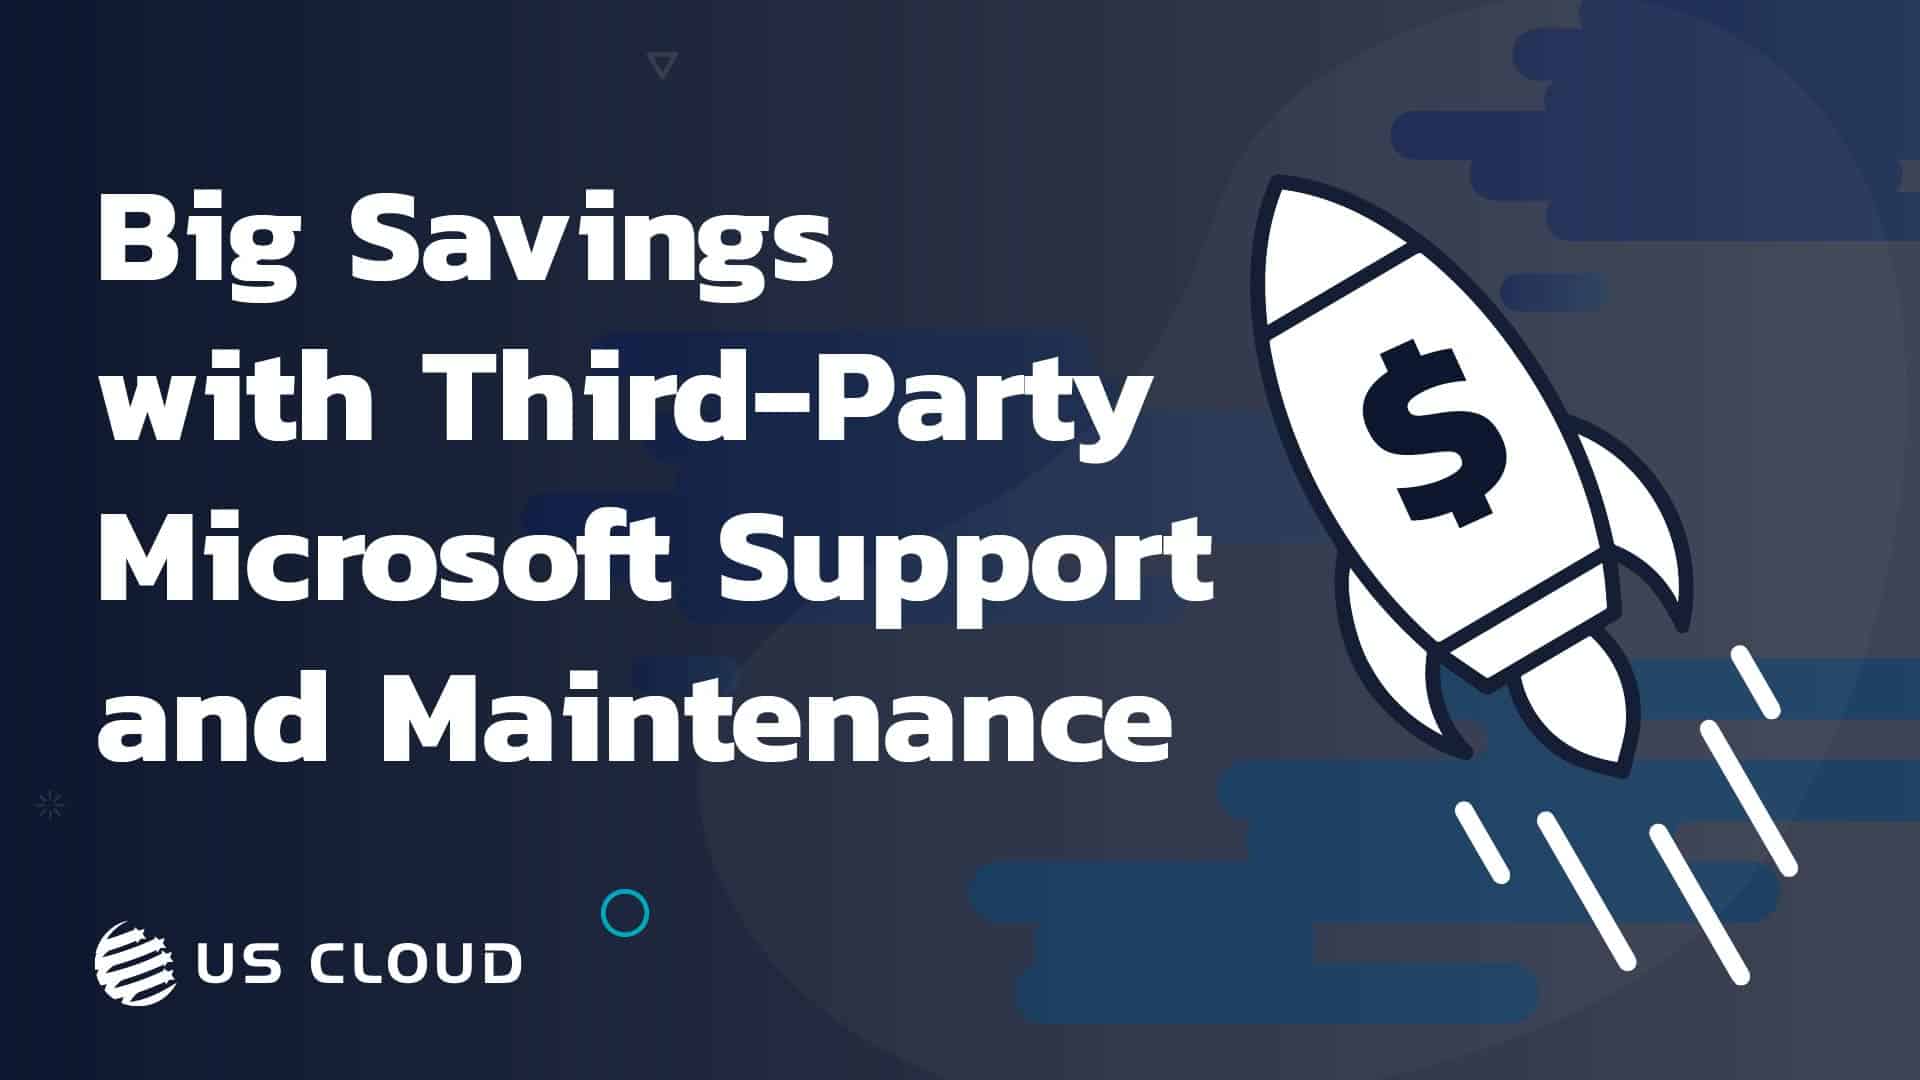 Switching to Third-Party Microsoft Support and Maintenance Leads to Big Savings